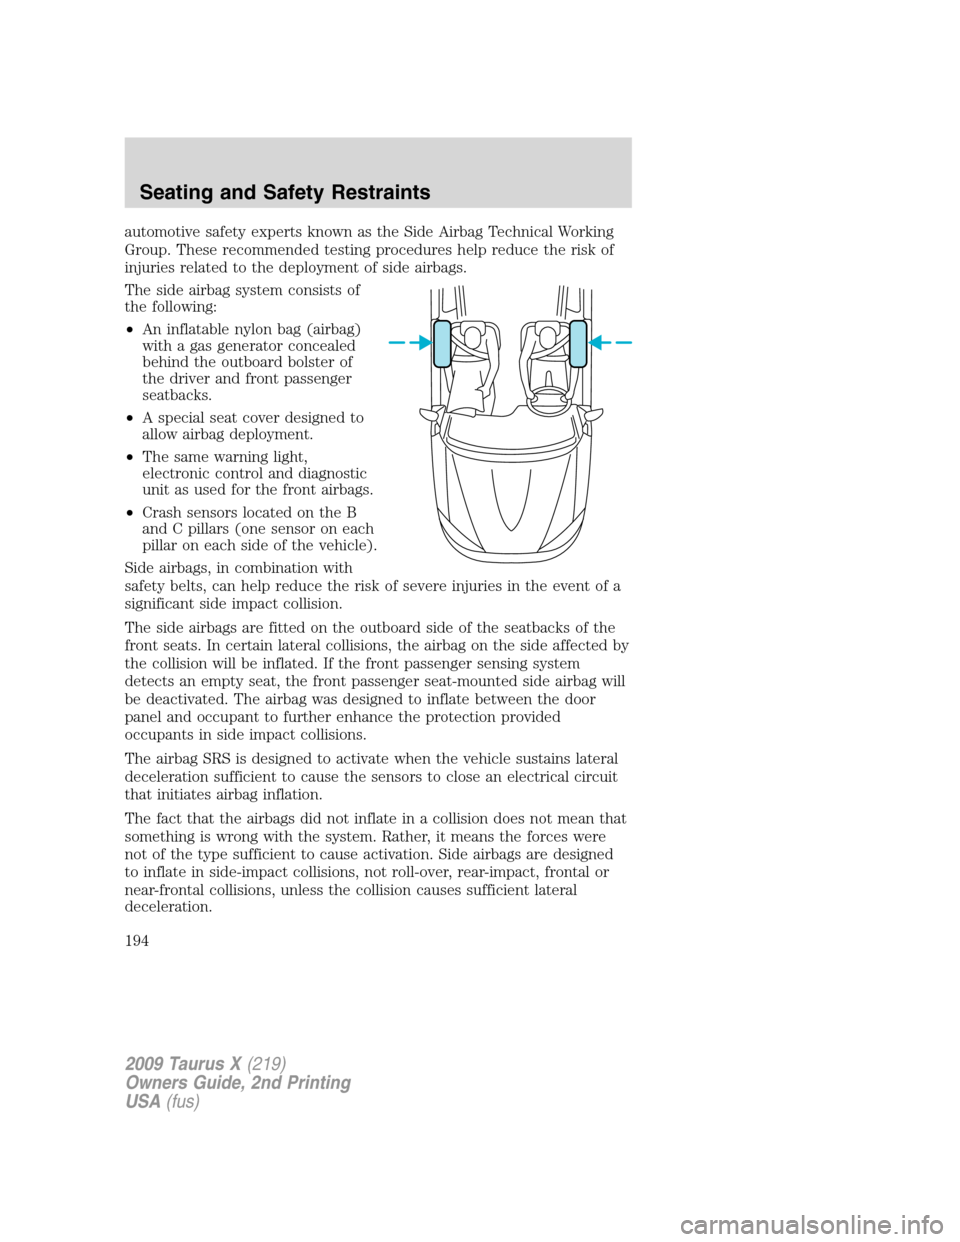 FORD TAURUS X 2009 1.G User Guide automotive safety experts known as the Side Airbag Technical Working
Group. These recommended testing procedures help reduce the risk of
injuries related to the deployment of side airbags.
The side ai